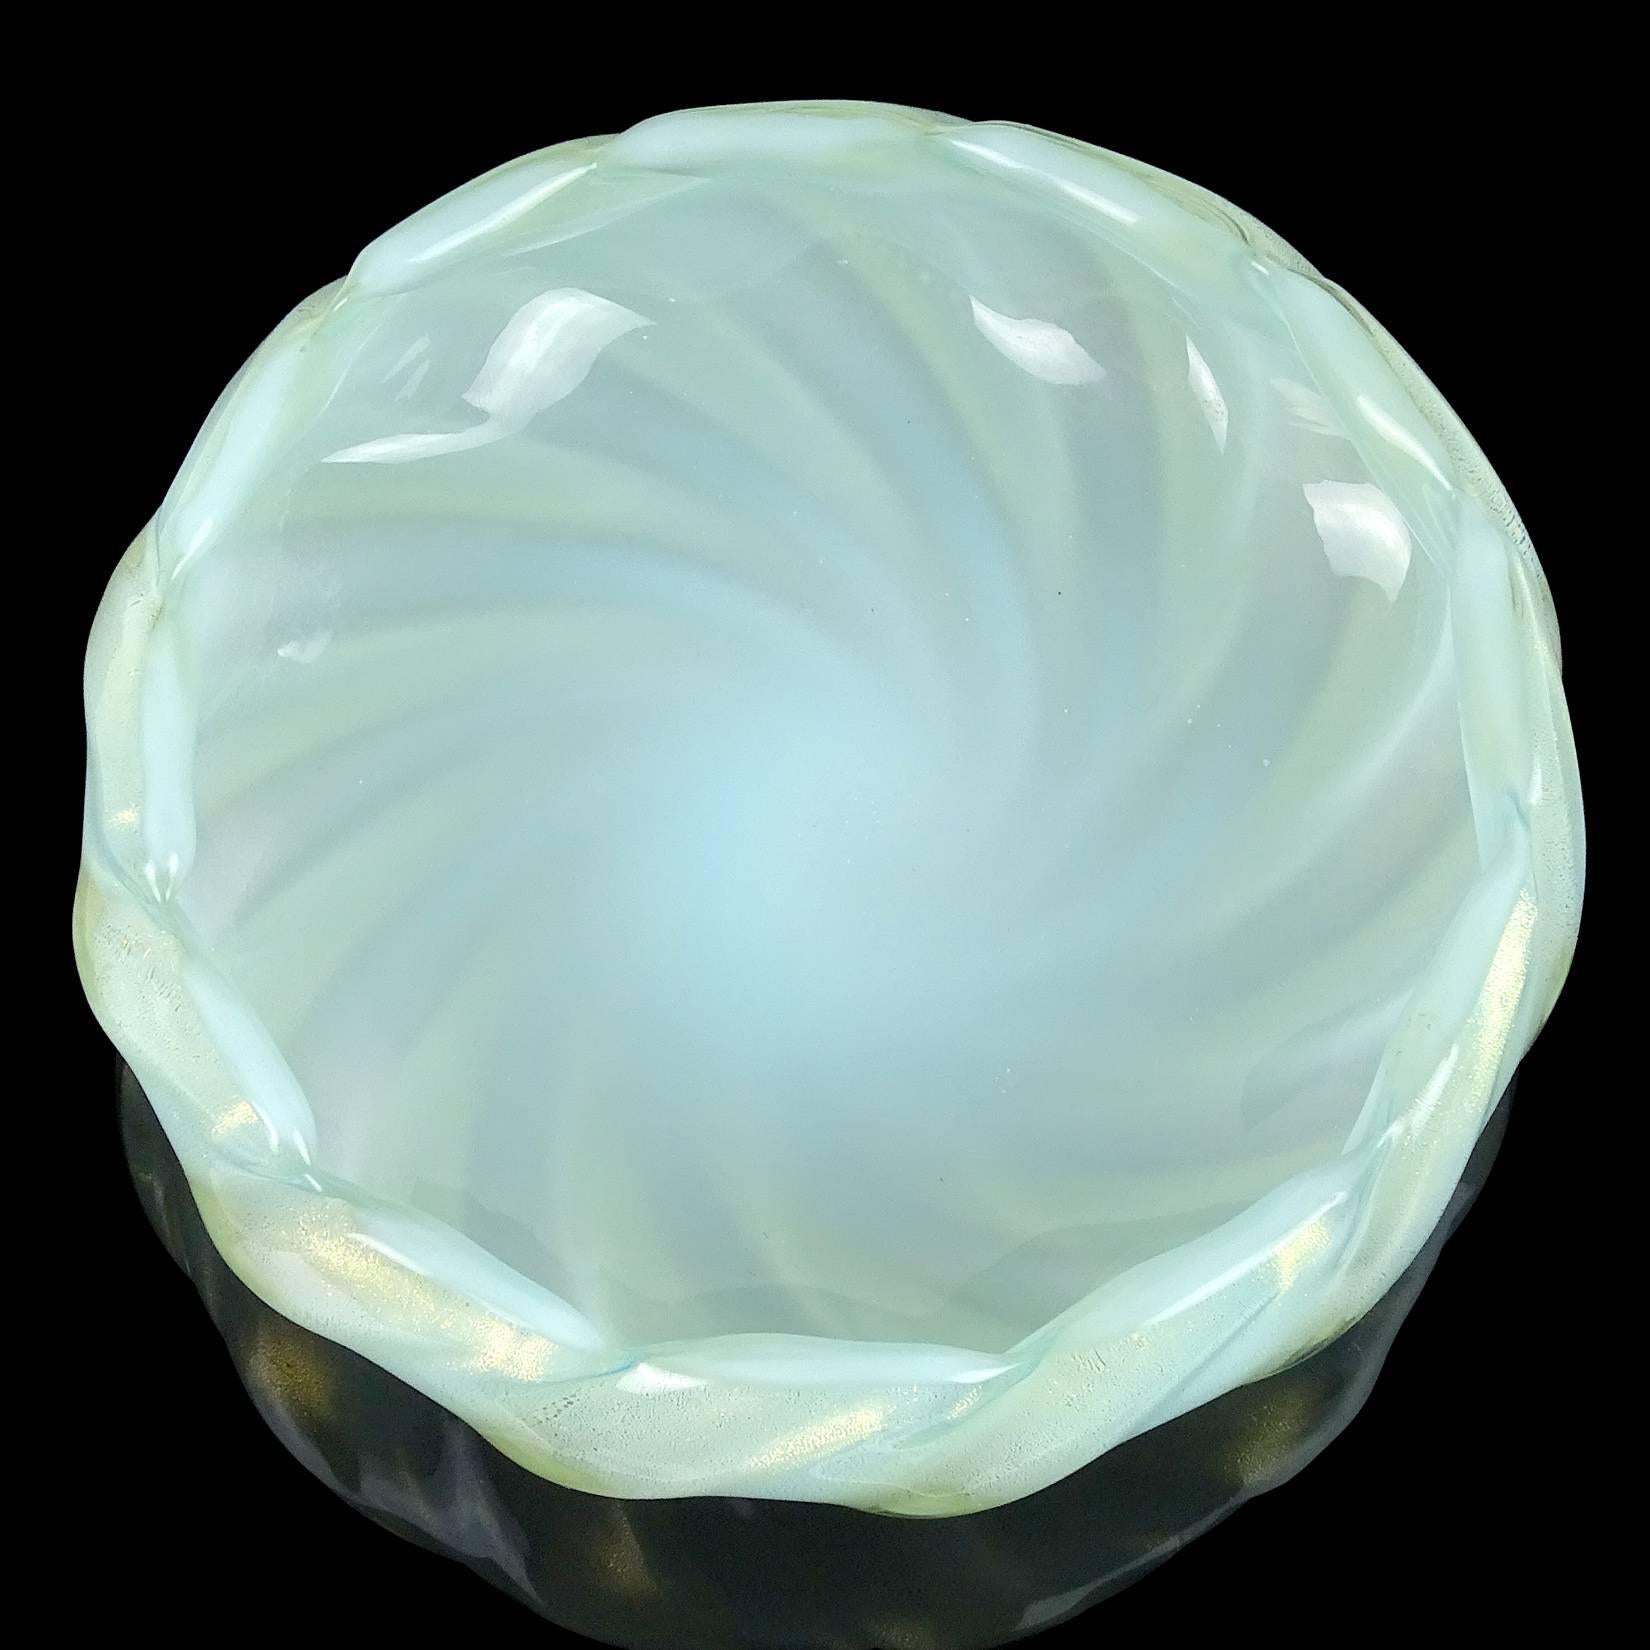 Beautiful vintage Murano hand blown opal white with very soft blue overlay, and gold flecks Italian art glass decorative bowl. Documented to designer Archimede Seguso, with original Murano label underneath. The piece is profusely covered in gold